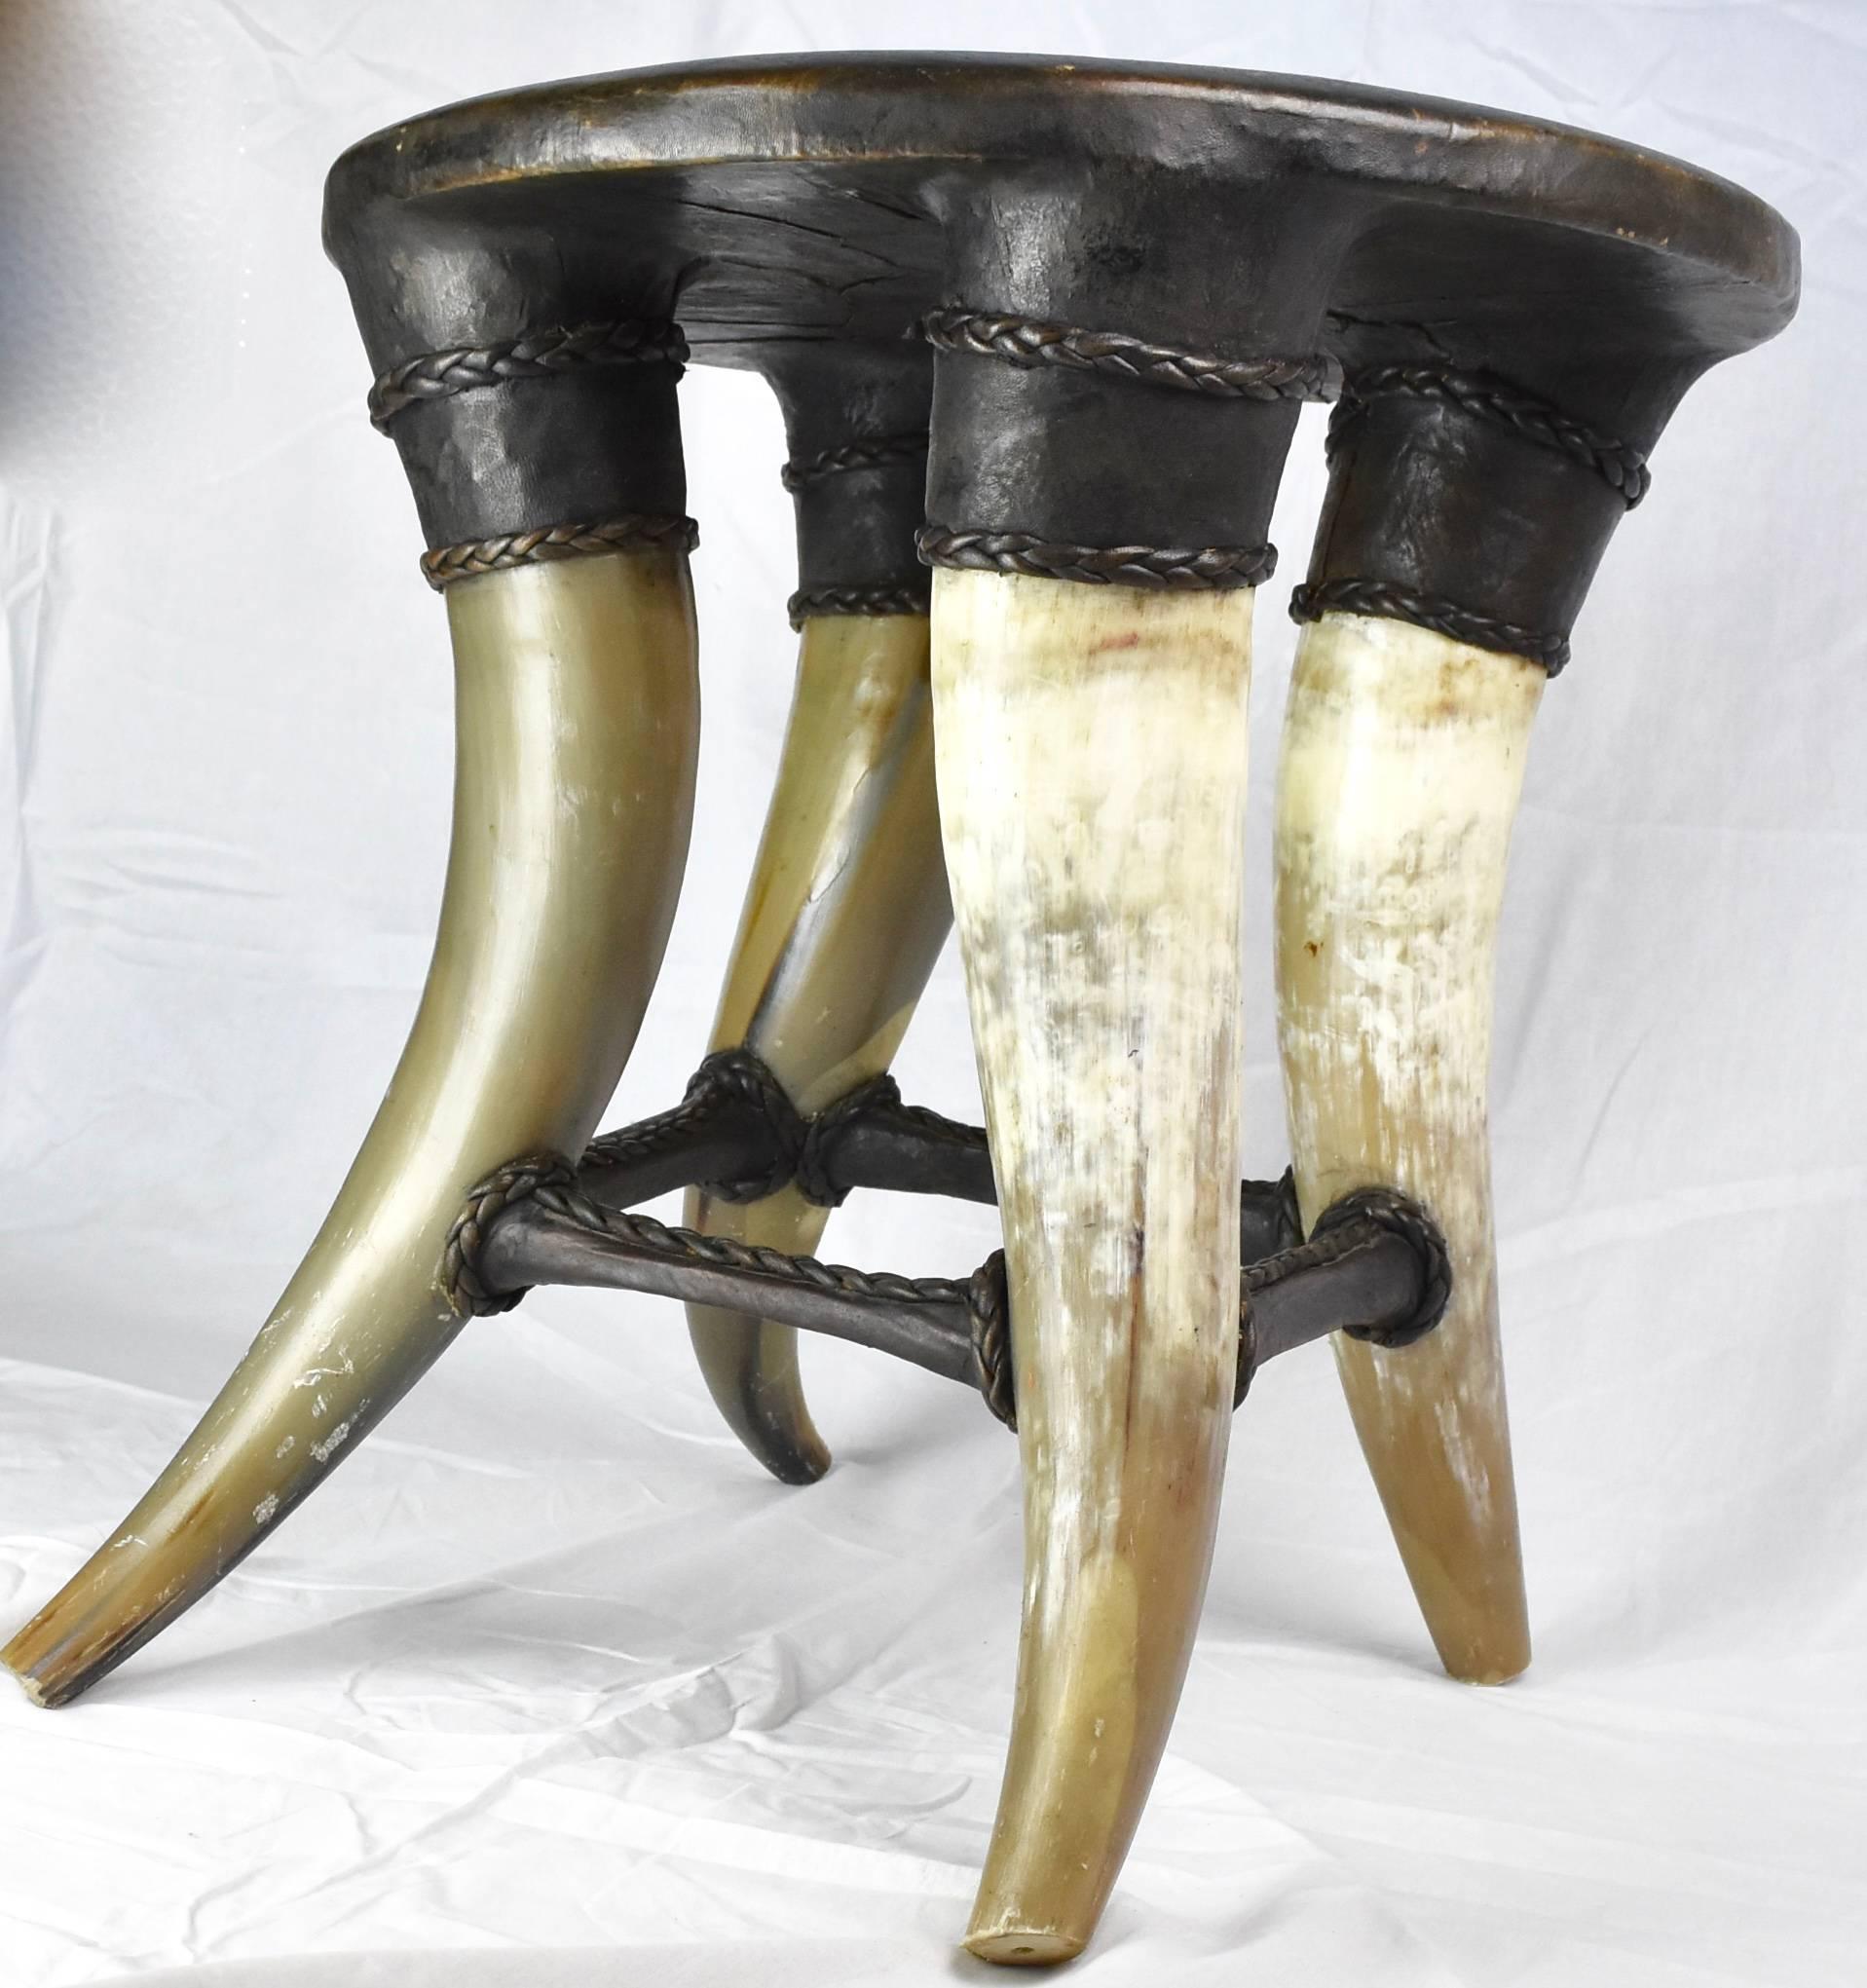 Featured is a beautifully shaped stool with rich leather and 4 horn legs. Notice the and hand sewn stitch detail on the four bases attaching to the horn.
Super Chic for a side table.